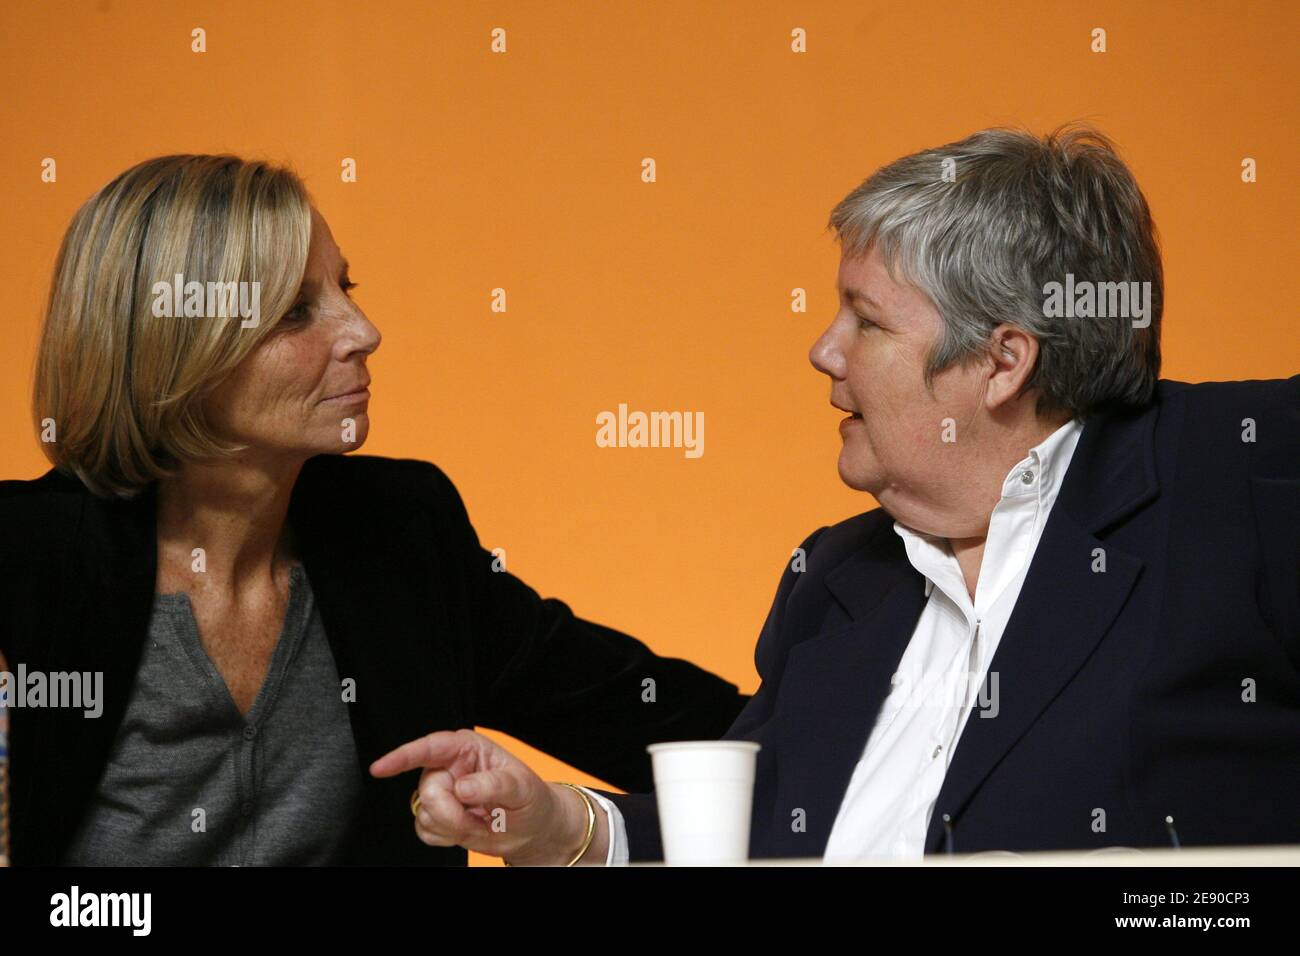 Marielle de Sarnez and Jacqueline Gourault attend the UDF's Congress in Villepinte, near Paris, France on November 30, 2007. Francois Bayrou announced that the Union pour la Democratie Francaise is being merged with his new movement Modem. Photo by Corentin Fohlen/ABACAPRESS.COM Stock Photo